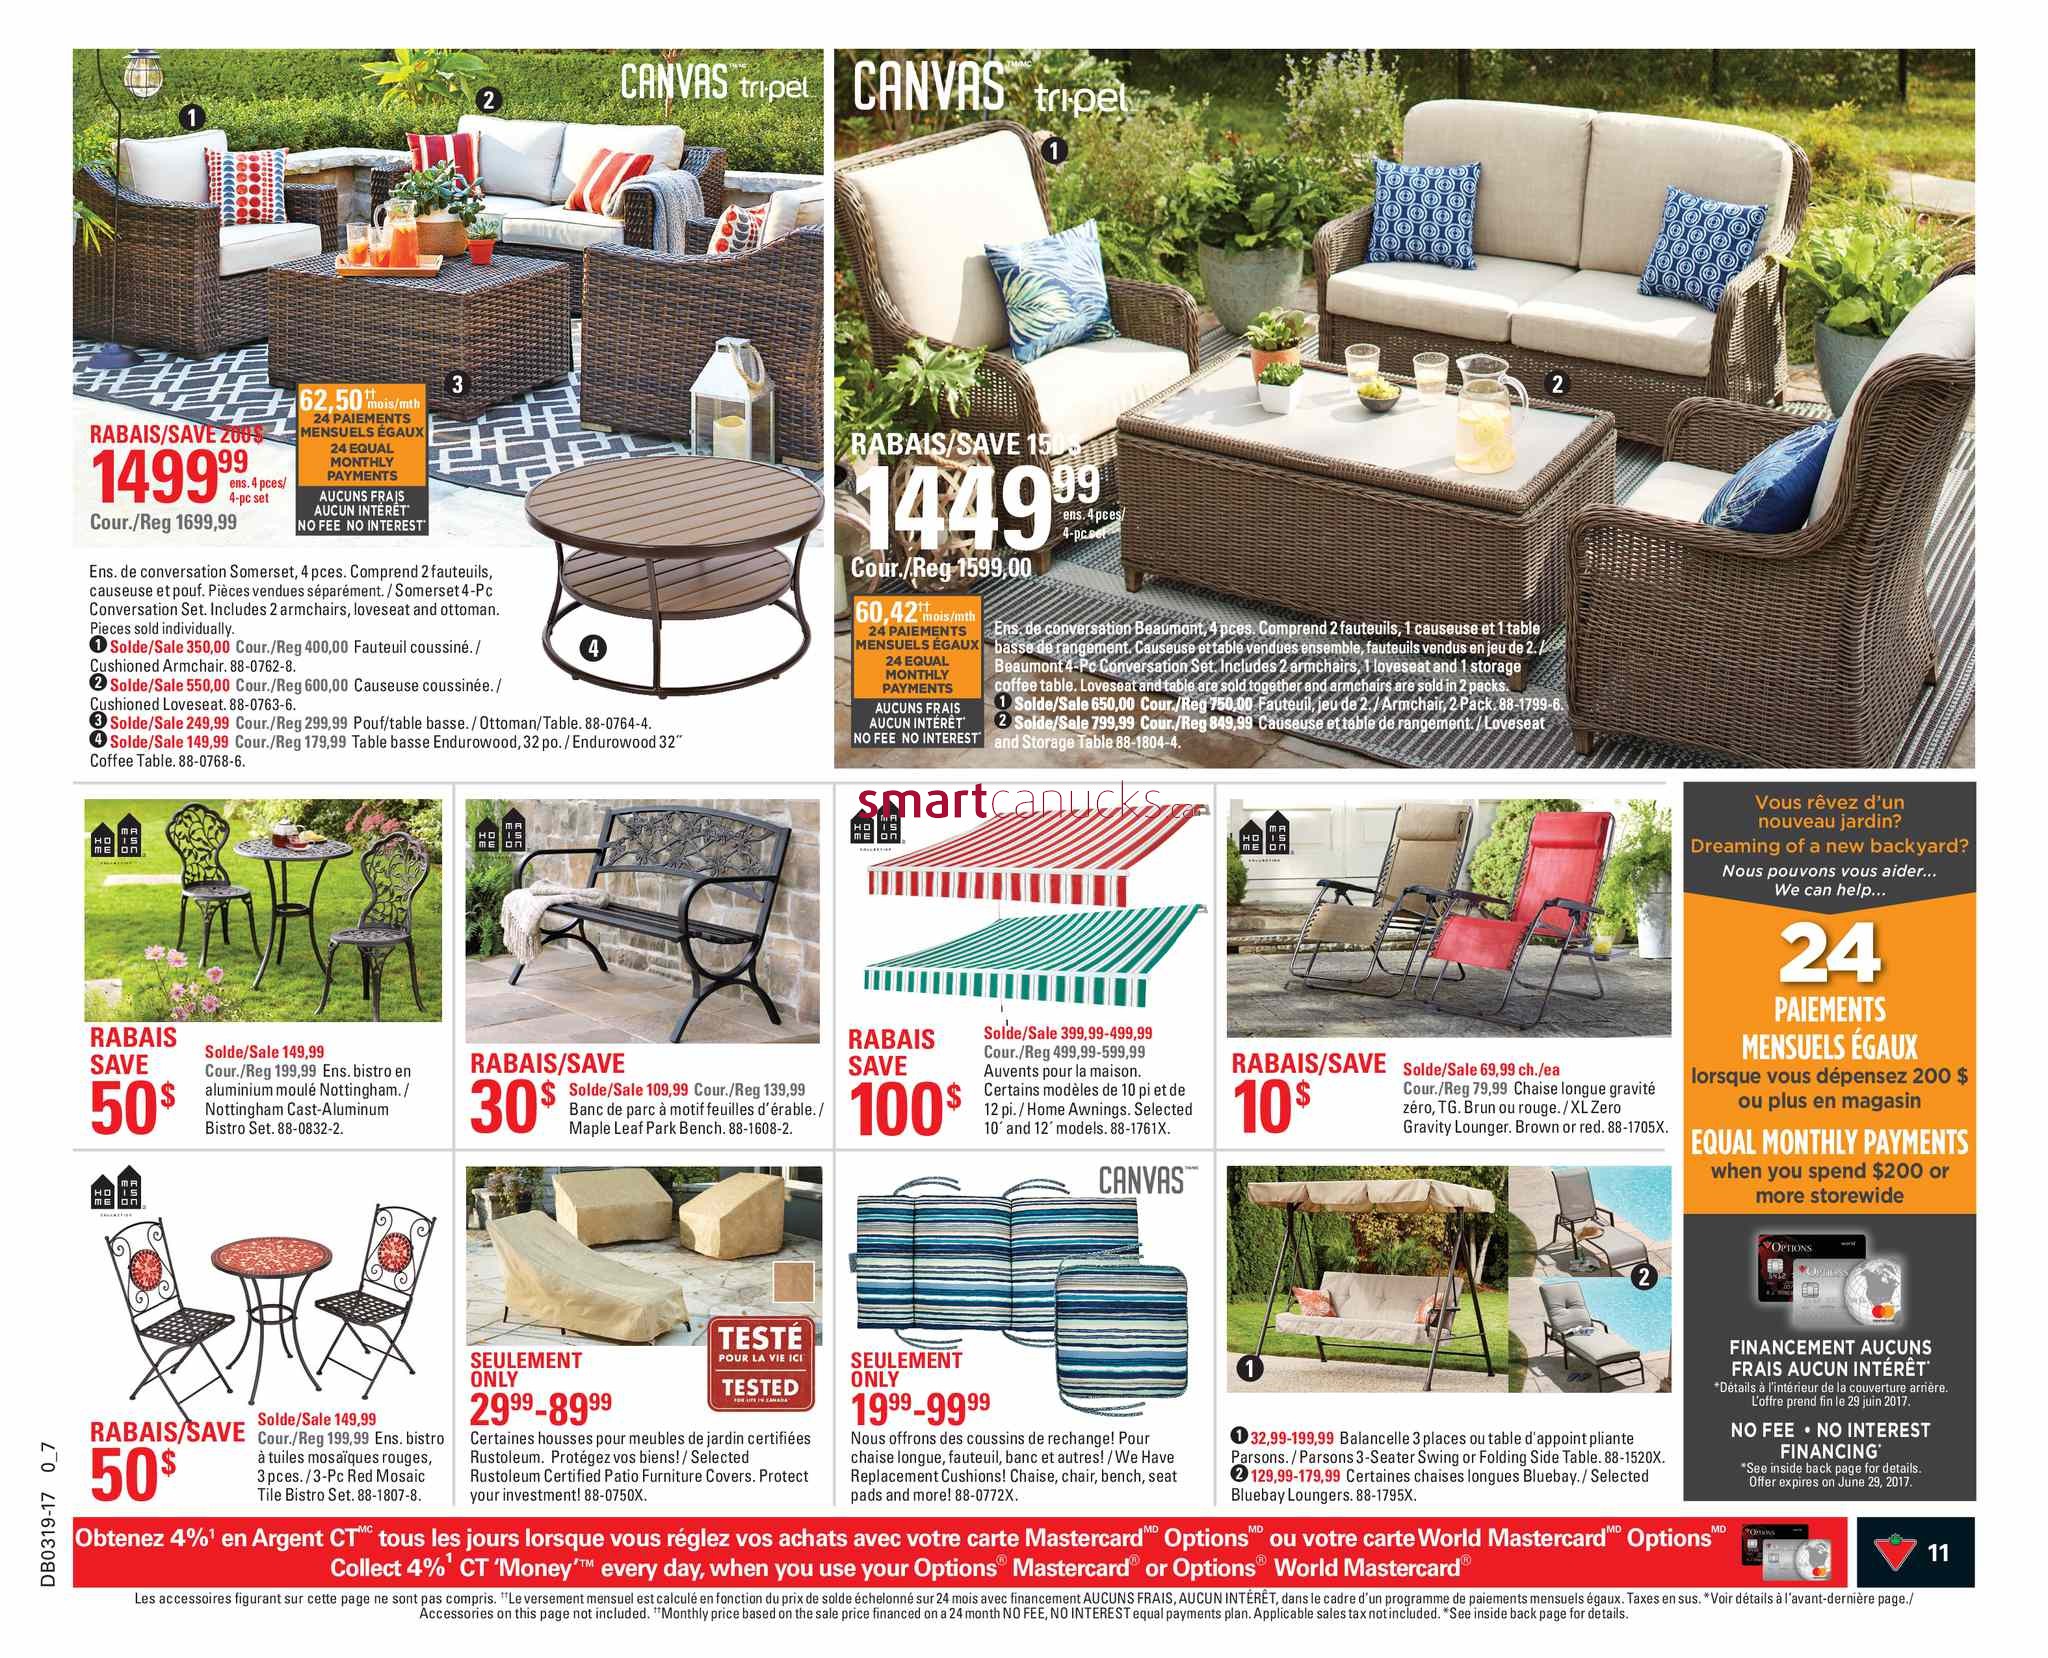 canadian tire flyer outdoor side table wicker patio furniture covers sweet alcoholic drinks square marble tops pier living room dresser legs linen sei mirage mirrored accent ikea